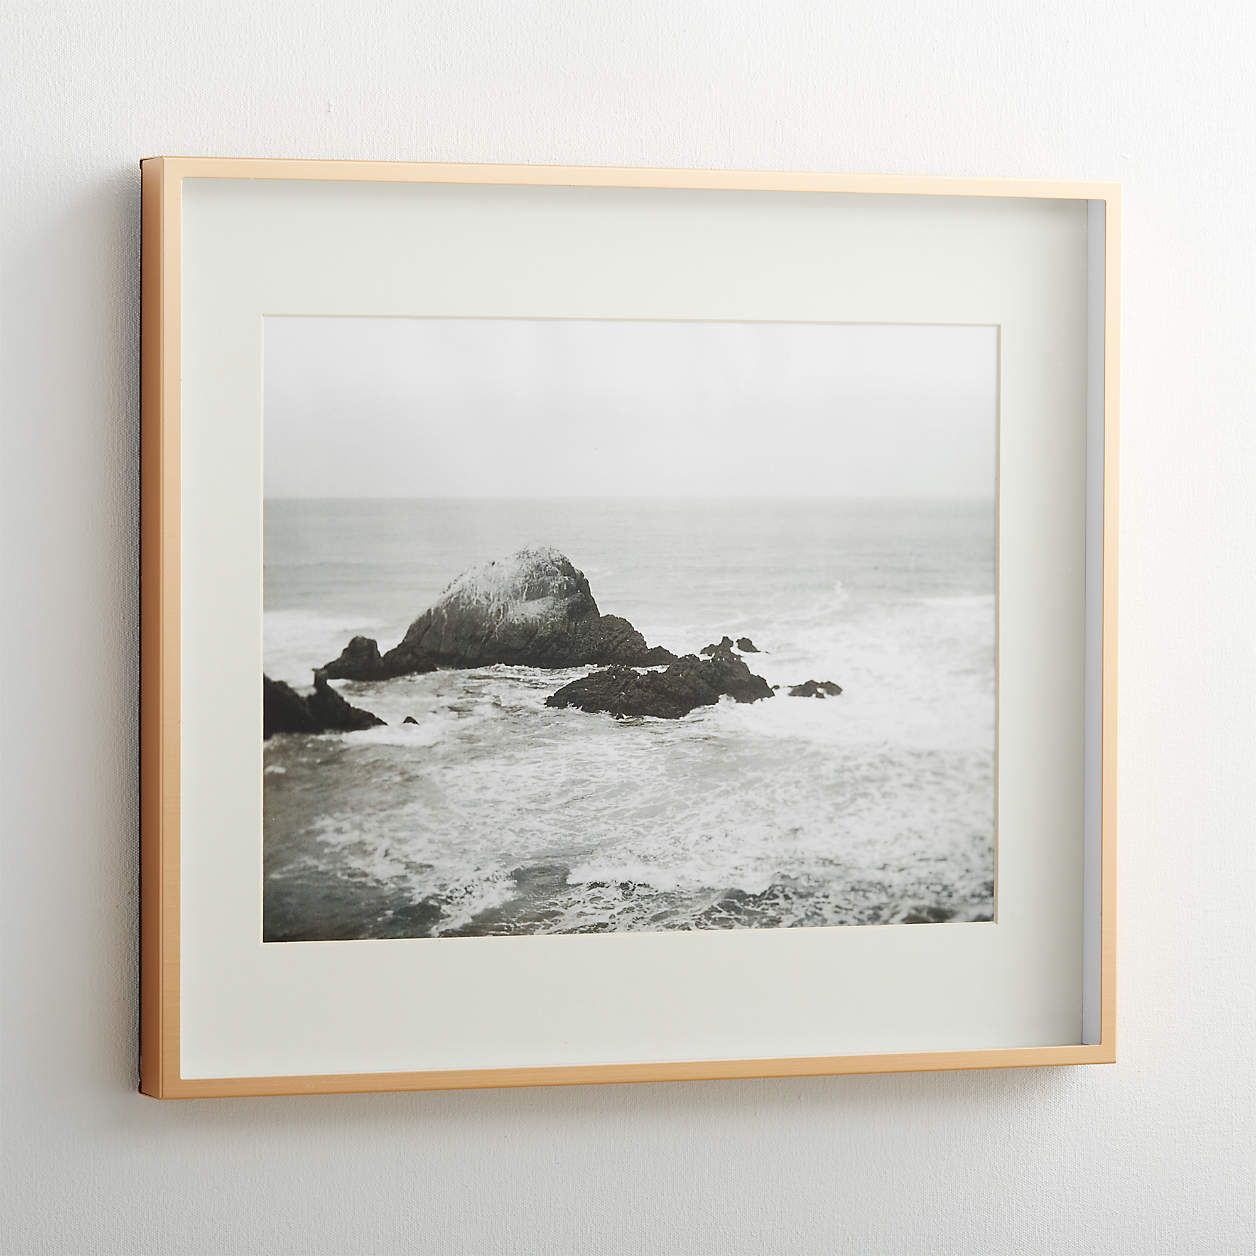 Brushed Brass 11x14 Wall Frame + Reviews | Crate and Barrel | Crate & Barrel